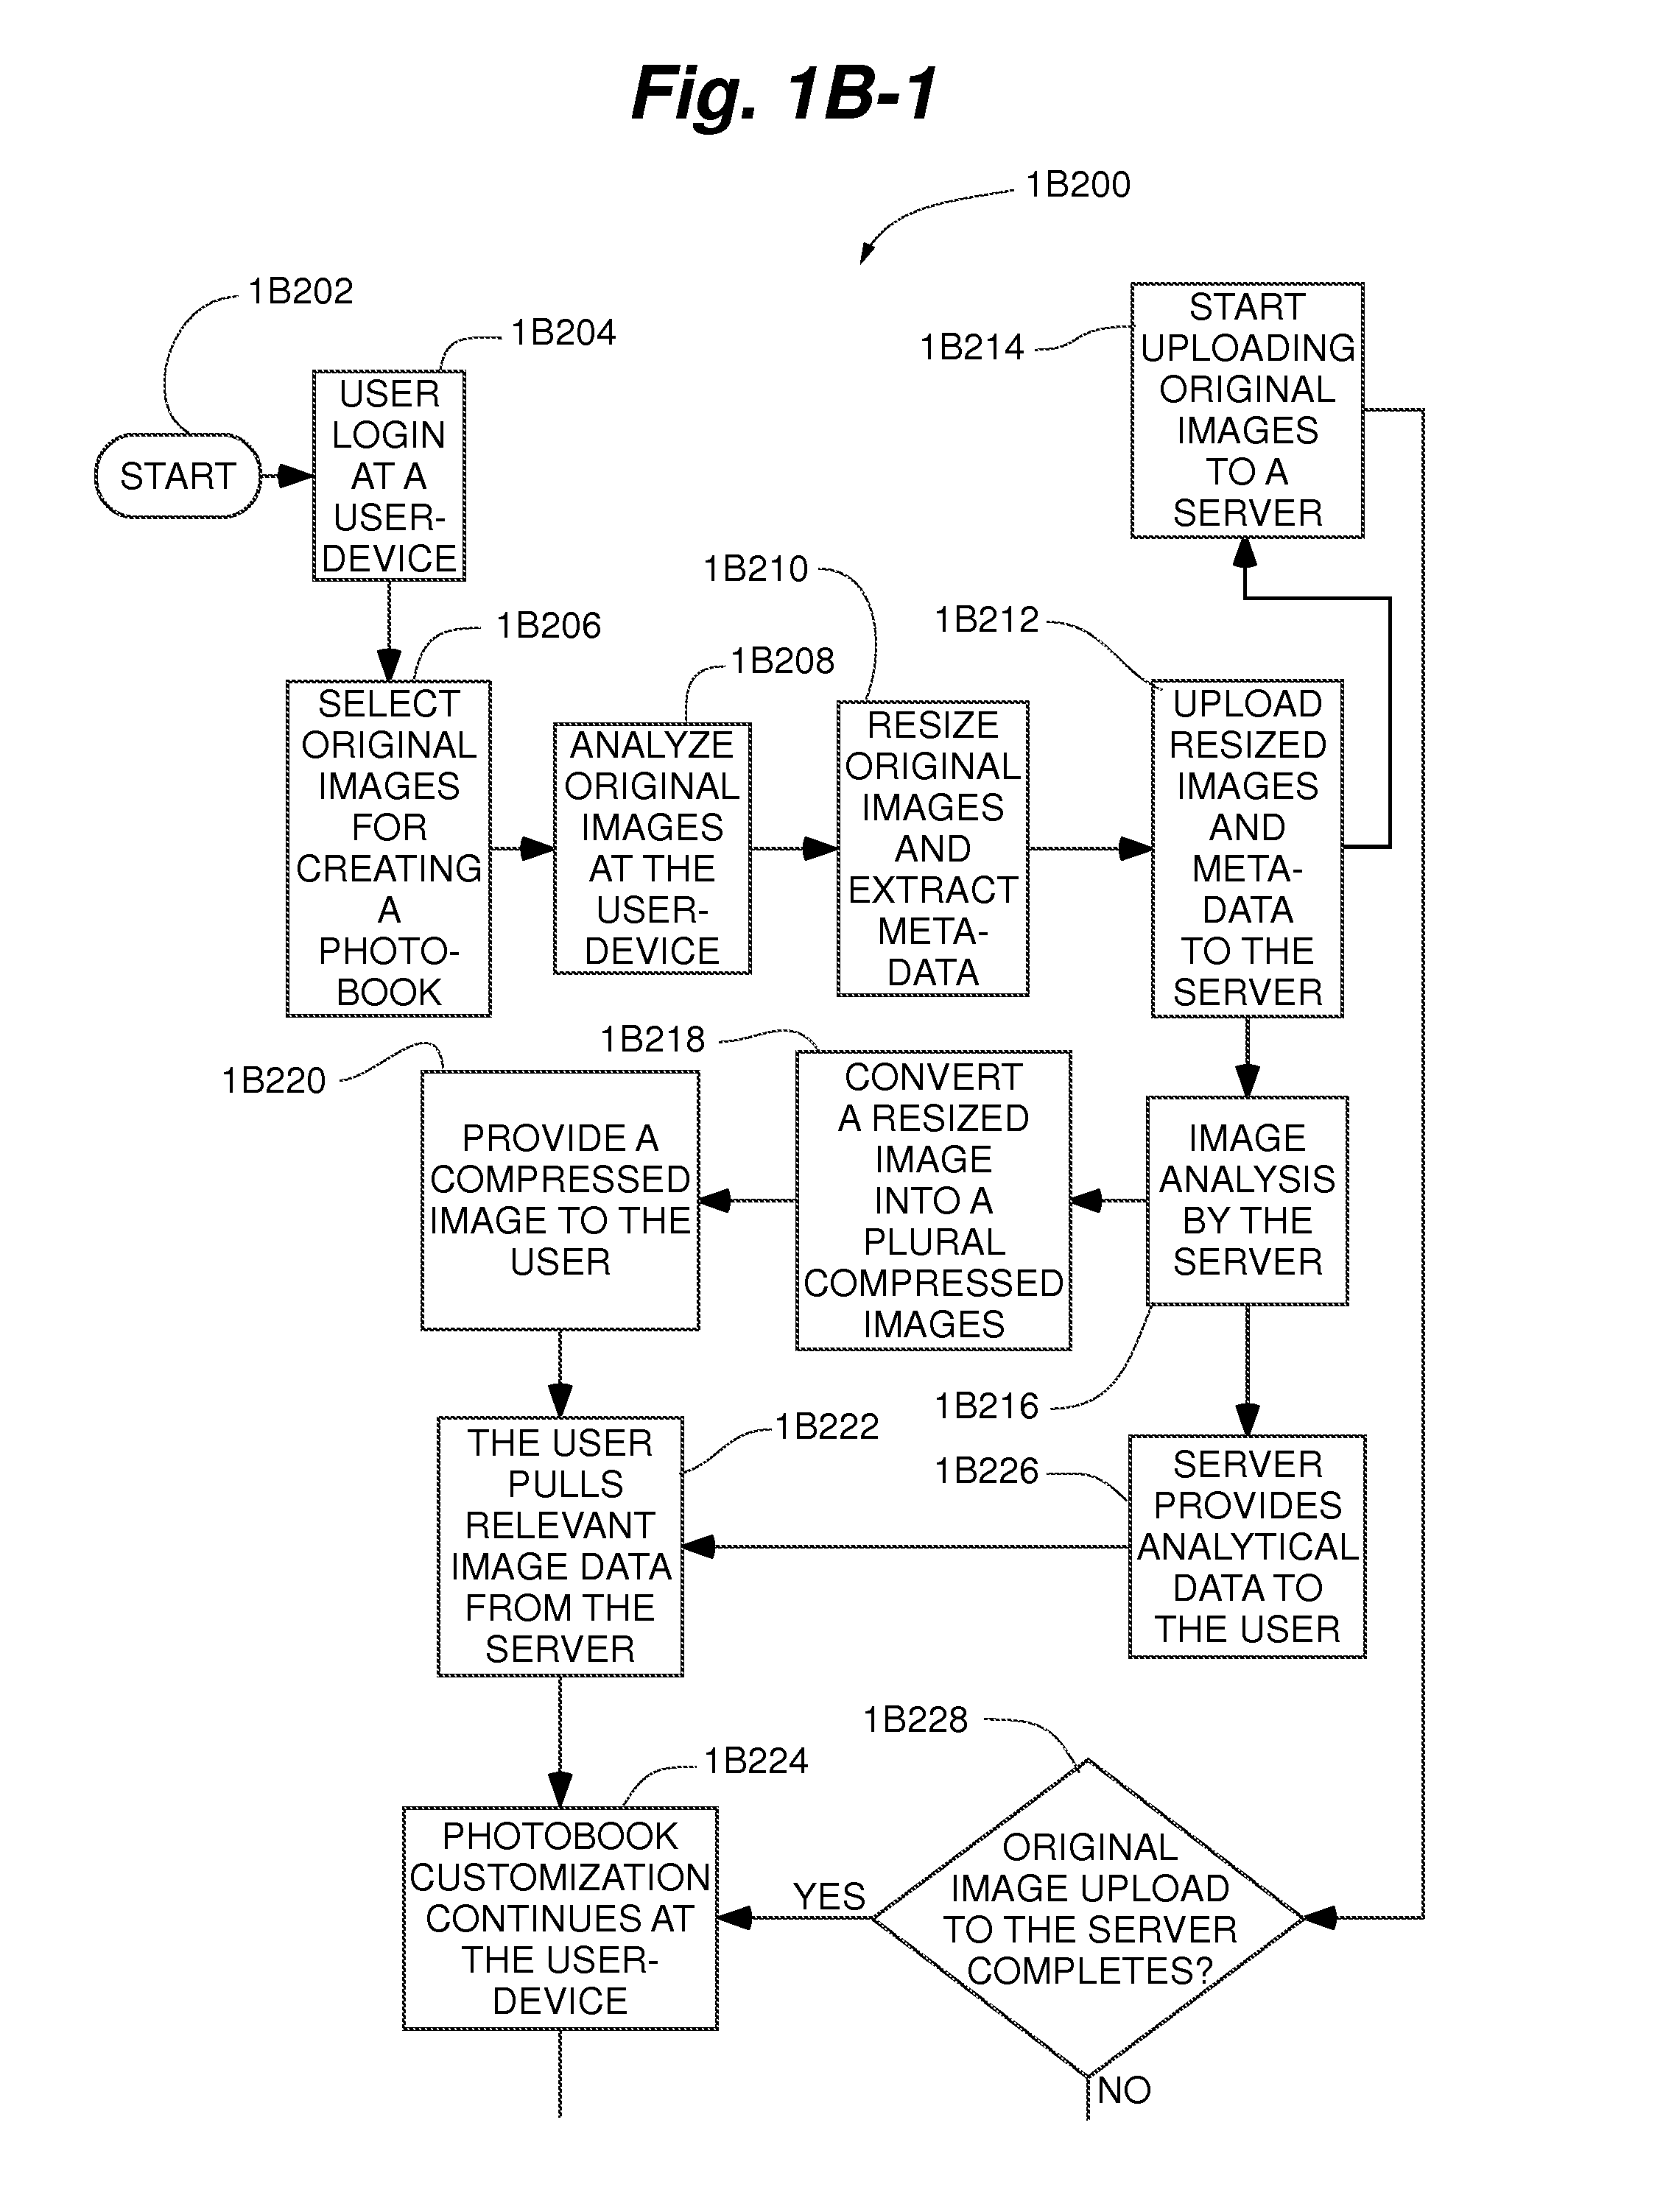 Systems and methods for automatically creating a photo-based project based on photo analysis and image metadata